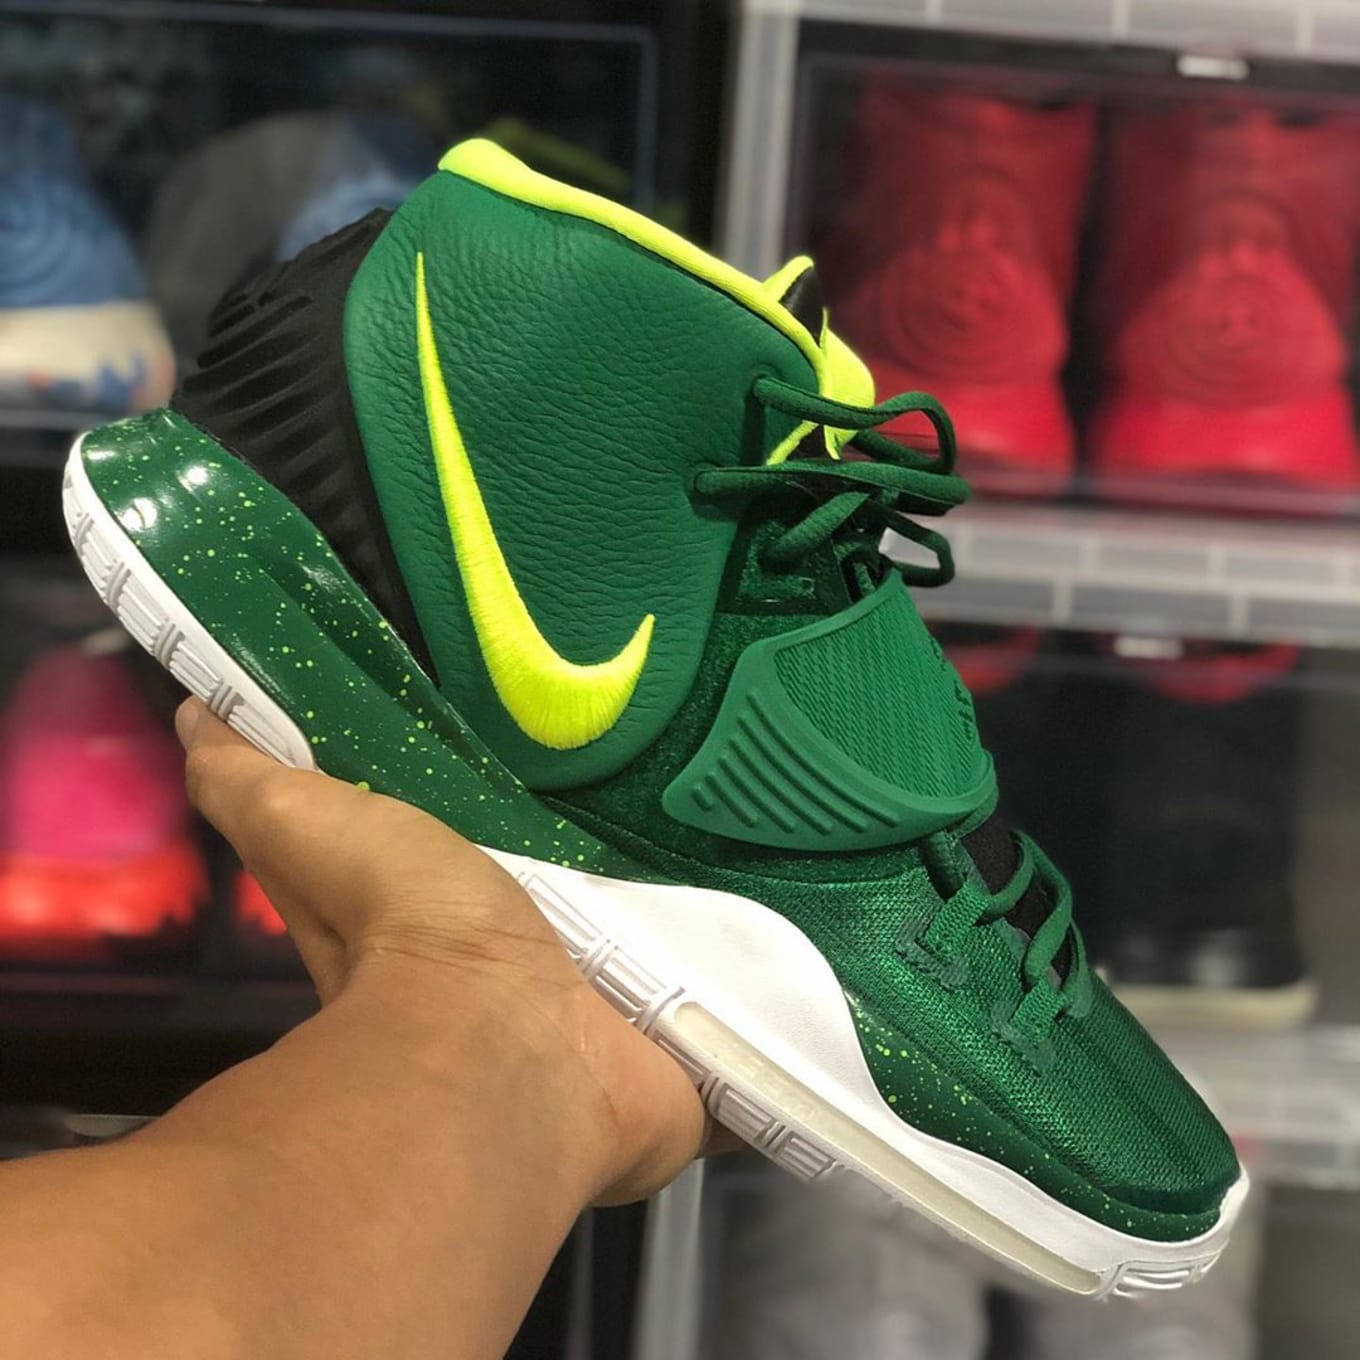 Nike iD By You Kyrie 6 | Sole Collector